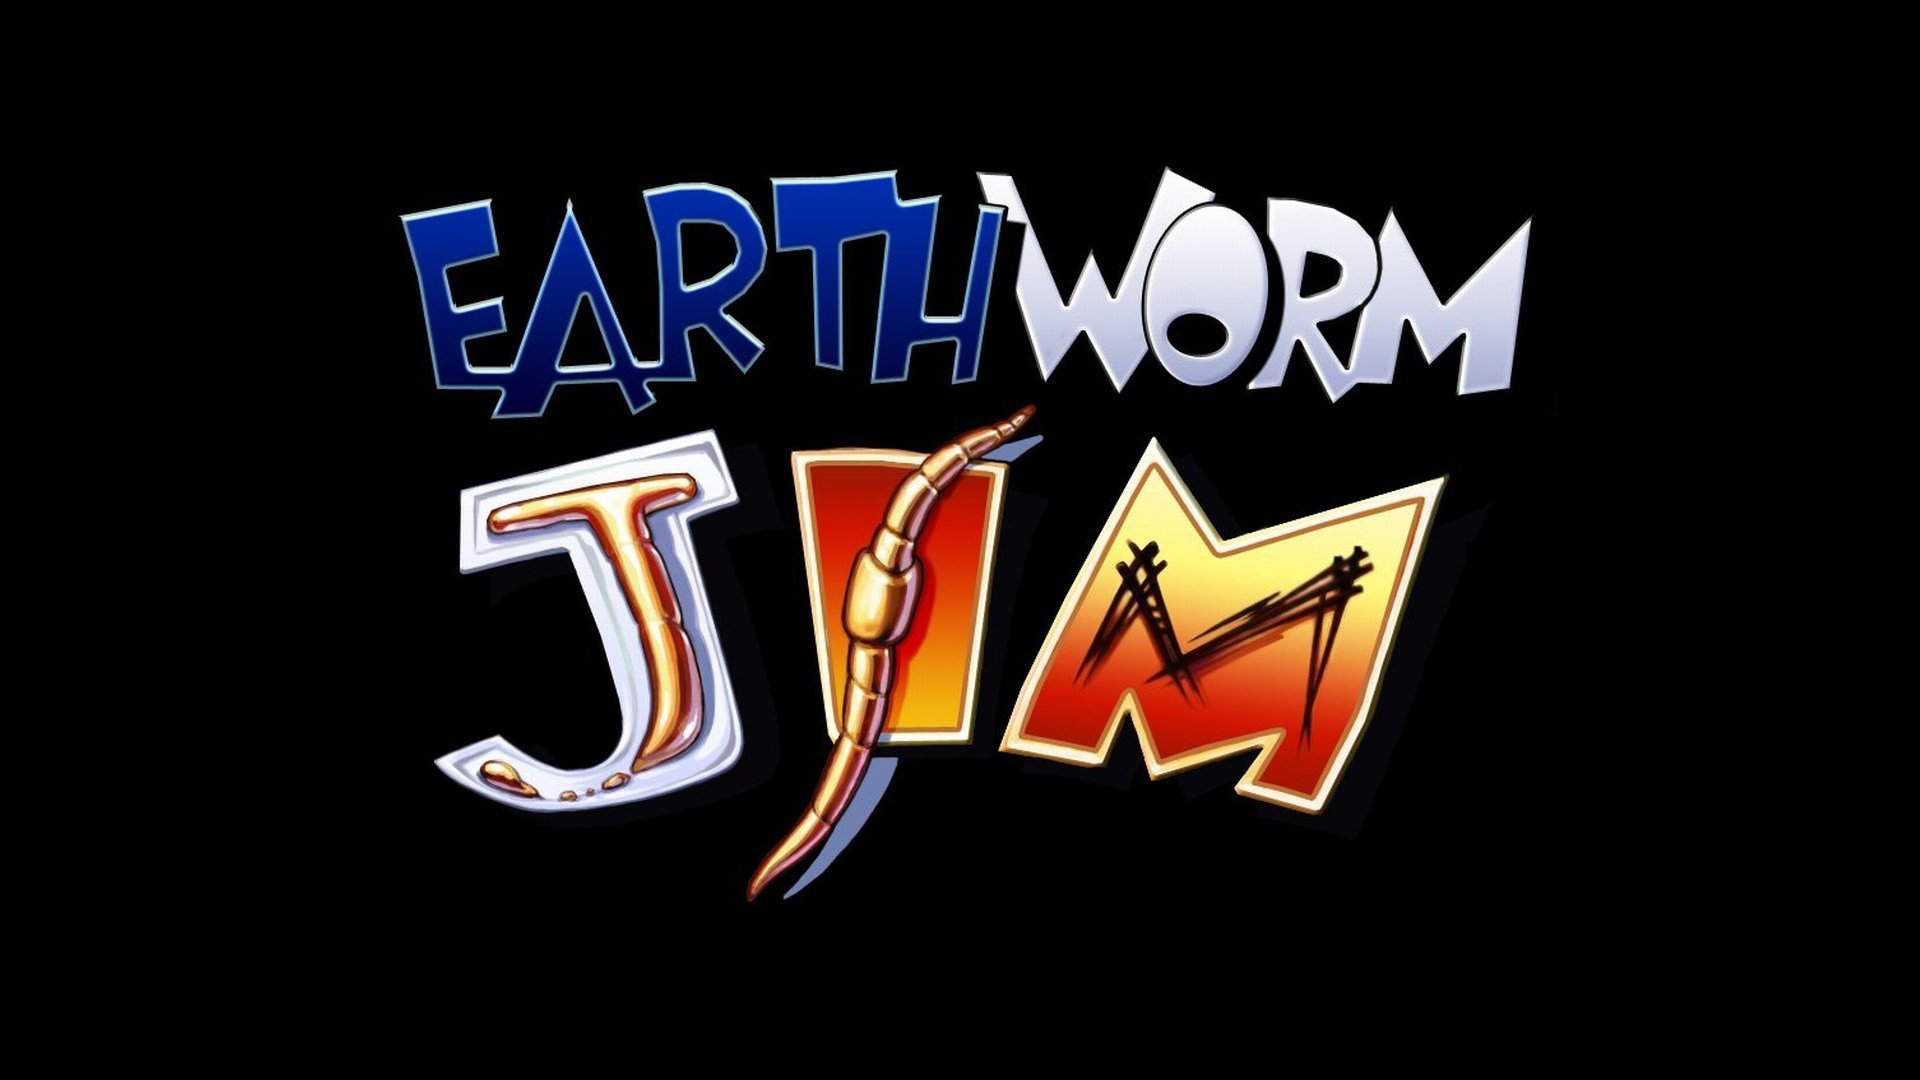 Download full hd 1080p Earthworm Jim desktop background ID:455026 for free